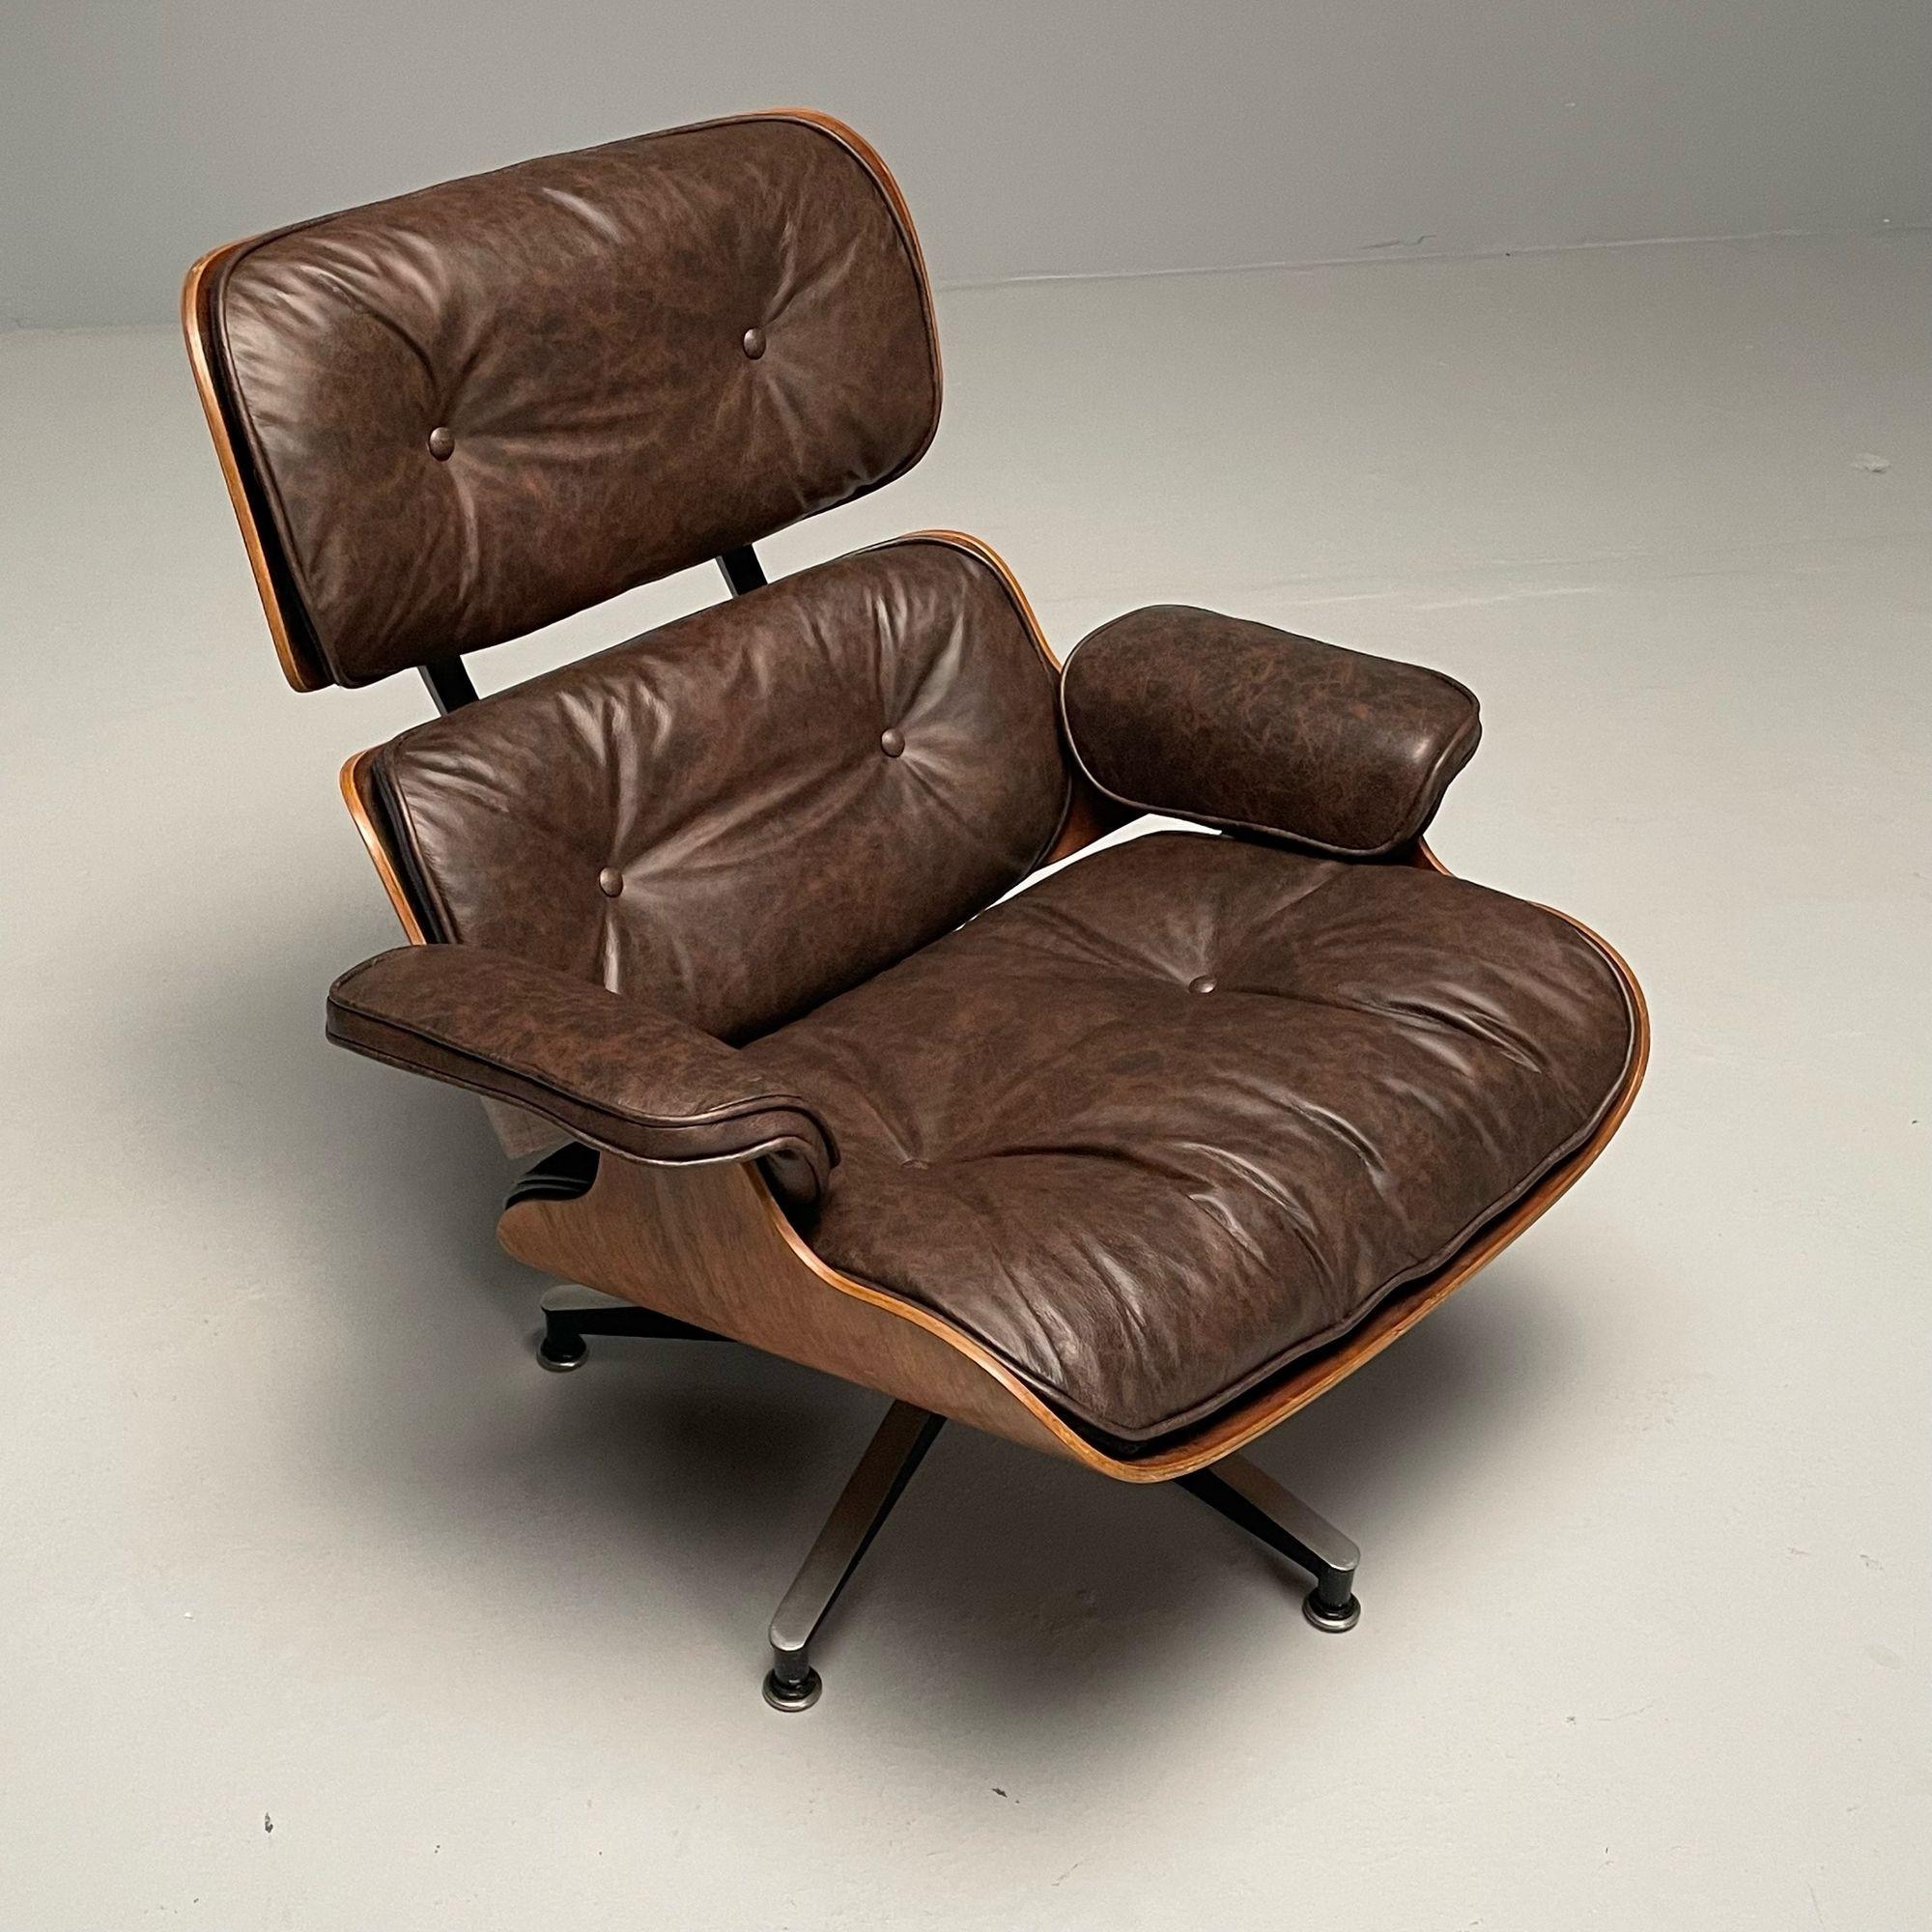 Herman Miller, Mid-Century Modern, Eames Lounge Chair, Ottoman, USA, 1960s For Sale 1